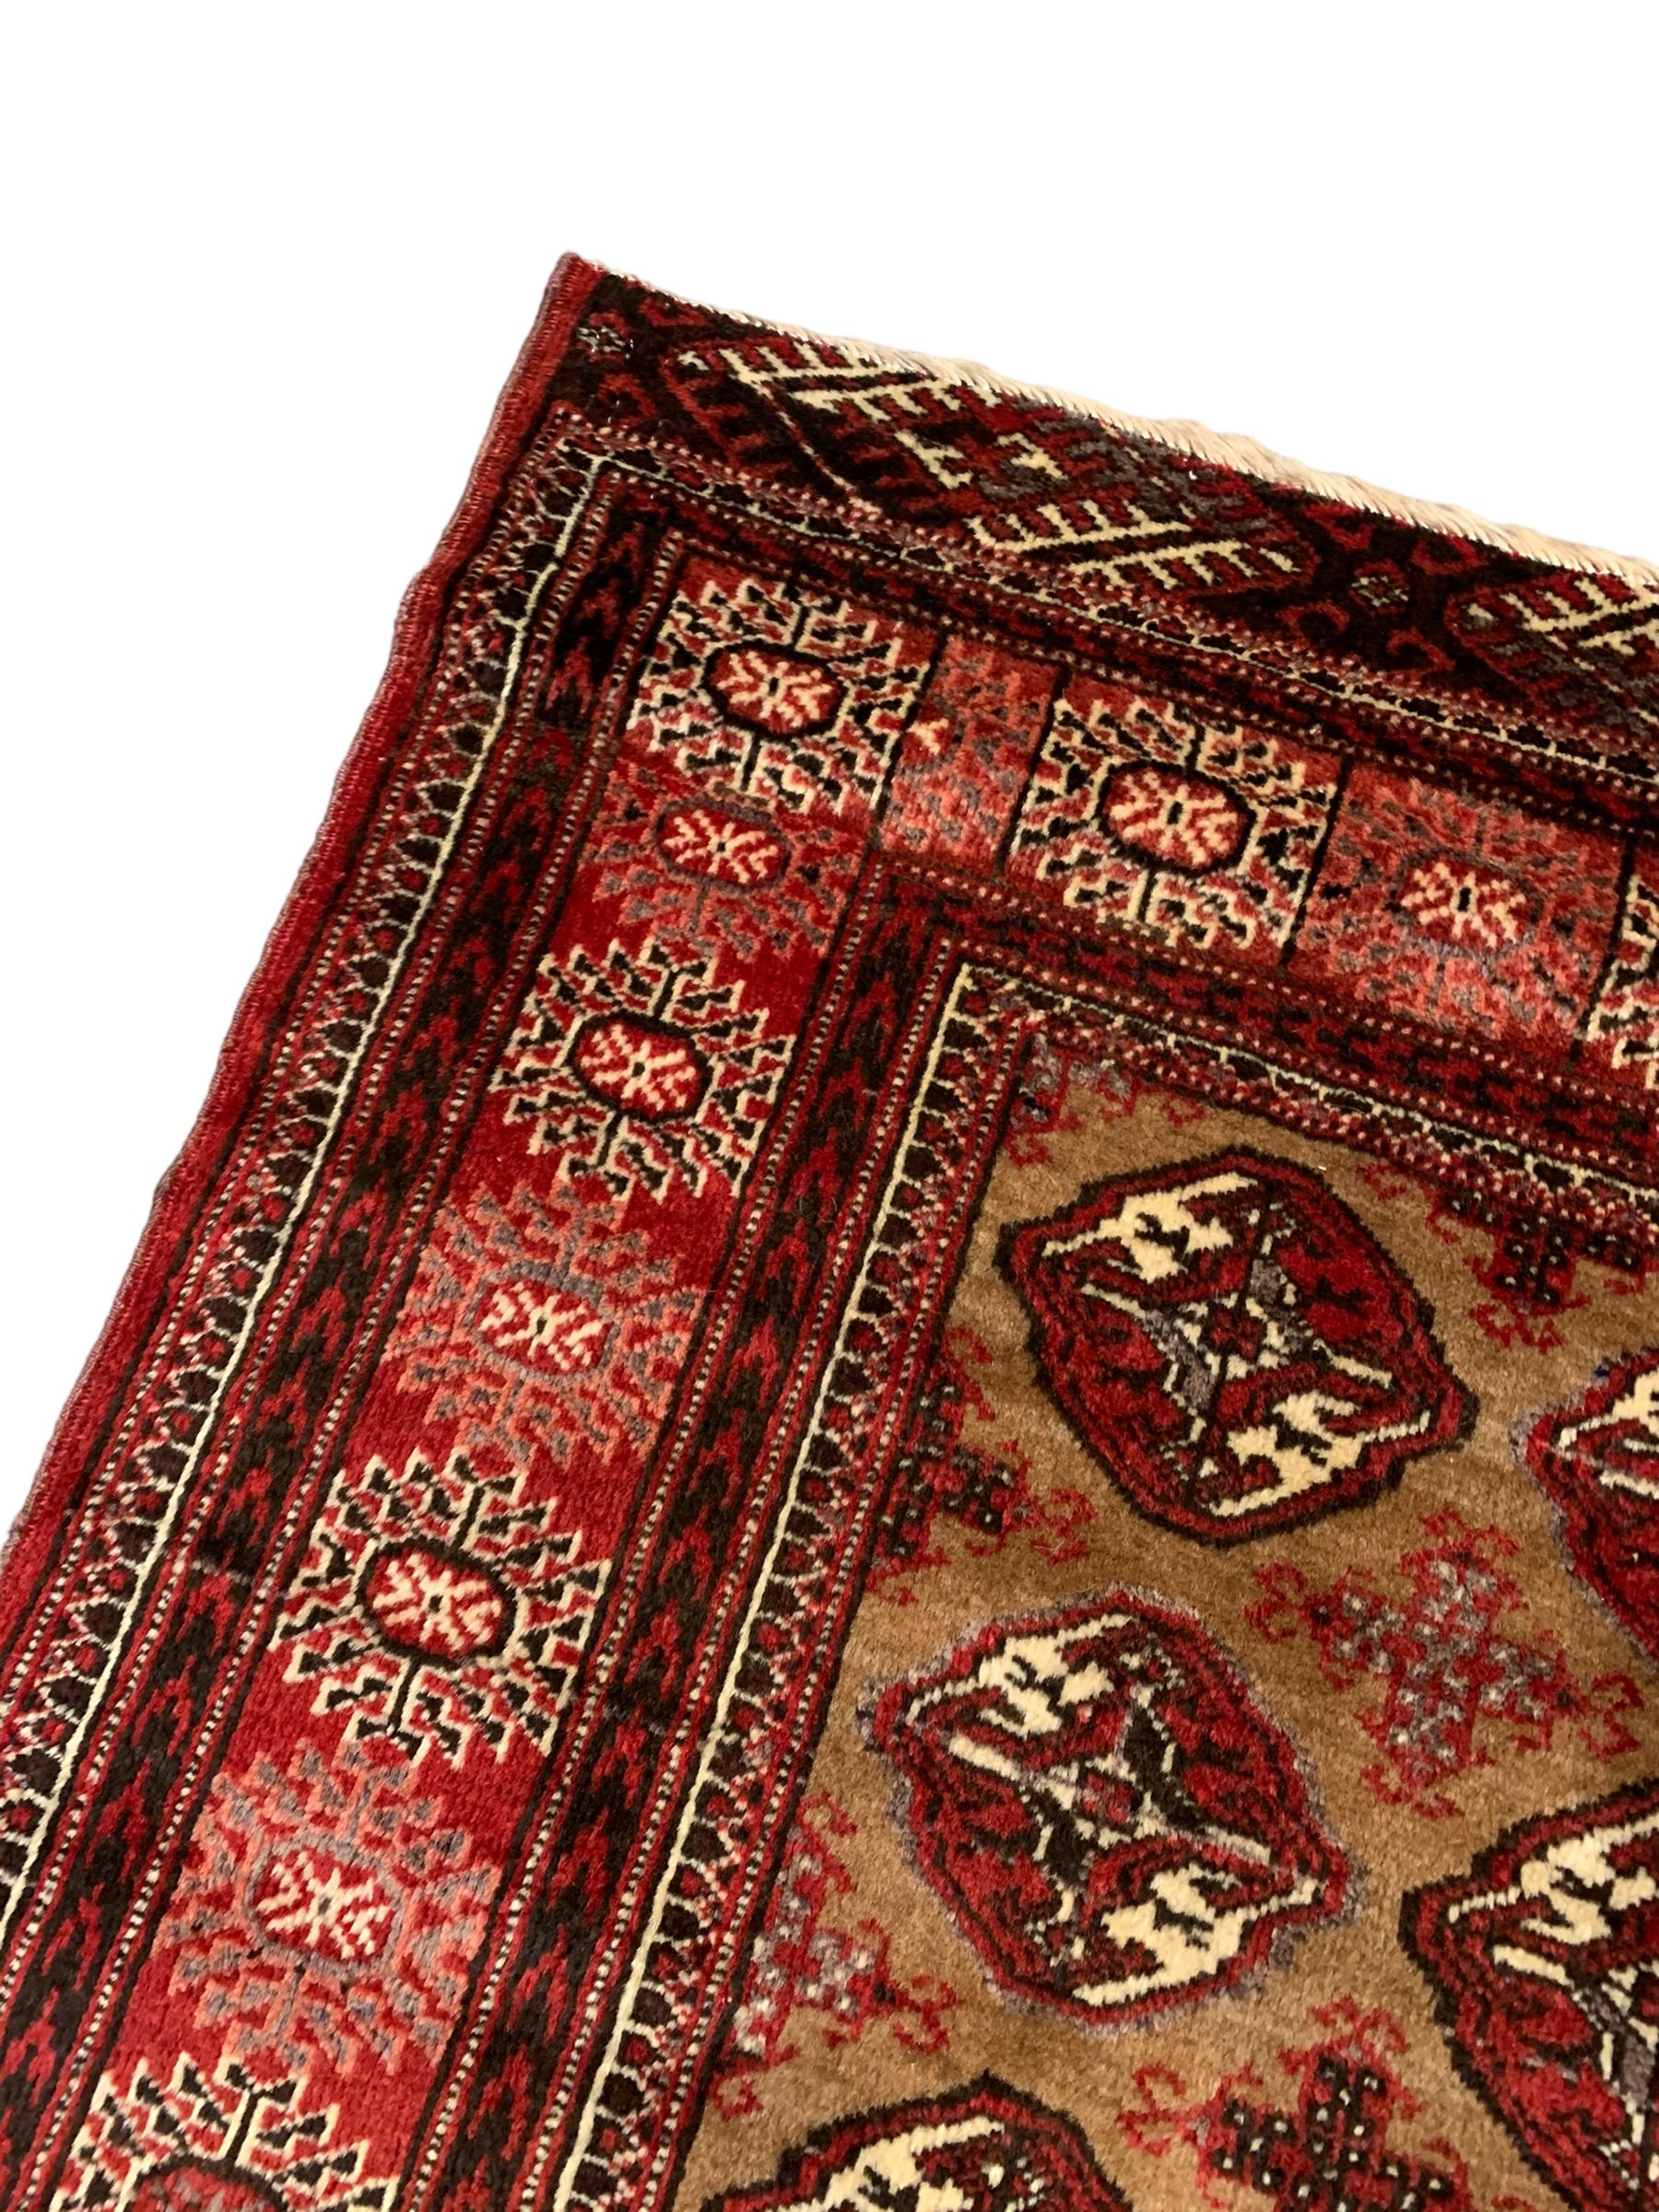 Persian Bokhara red ground rug - Image 3 of 6